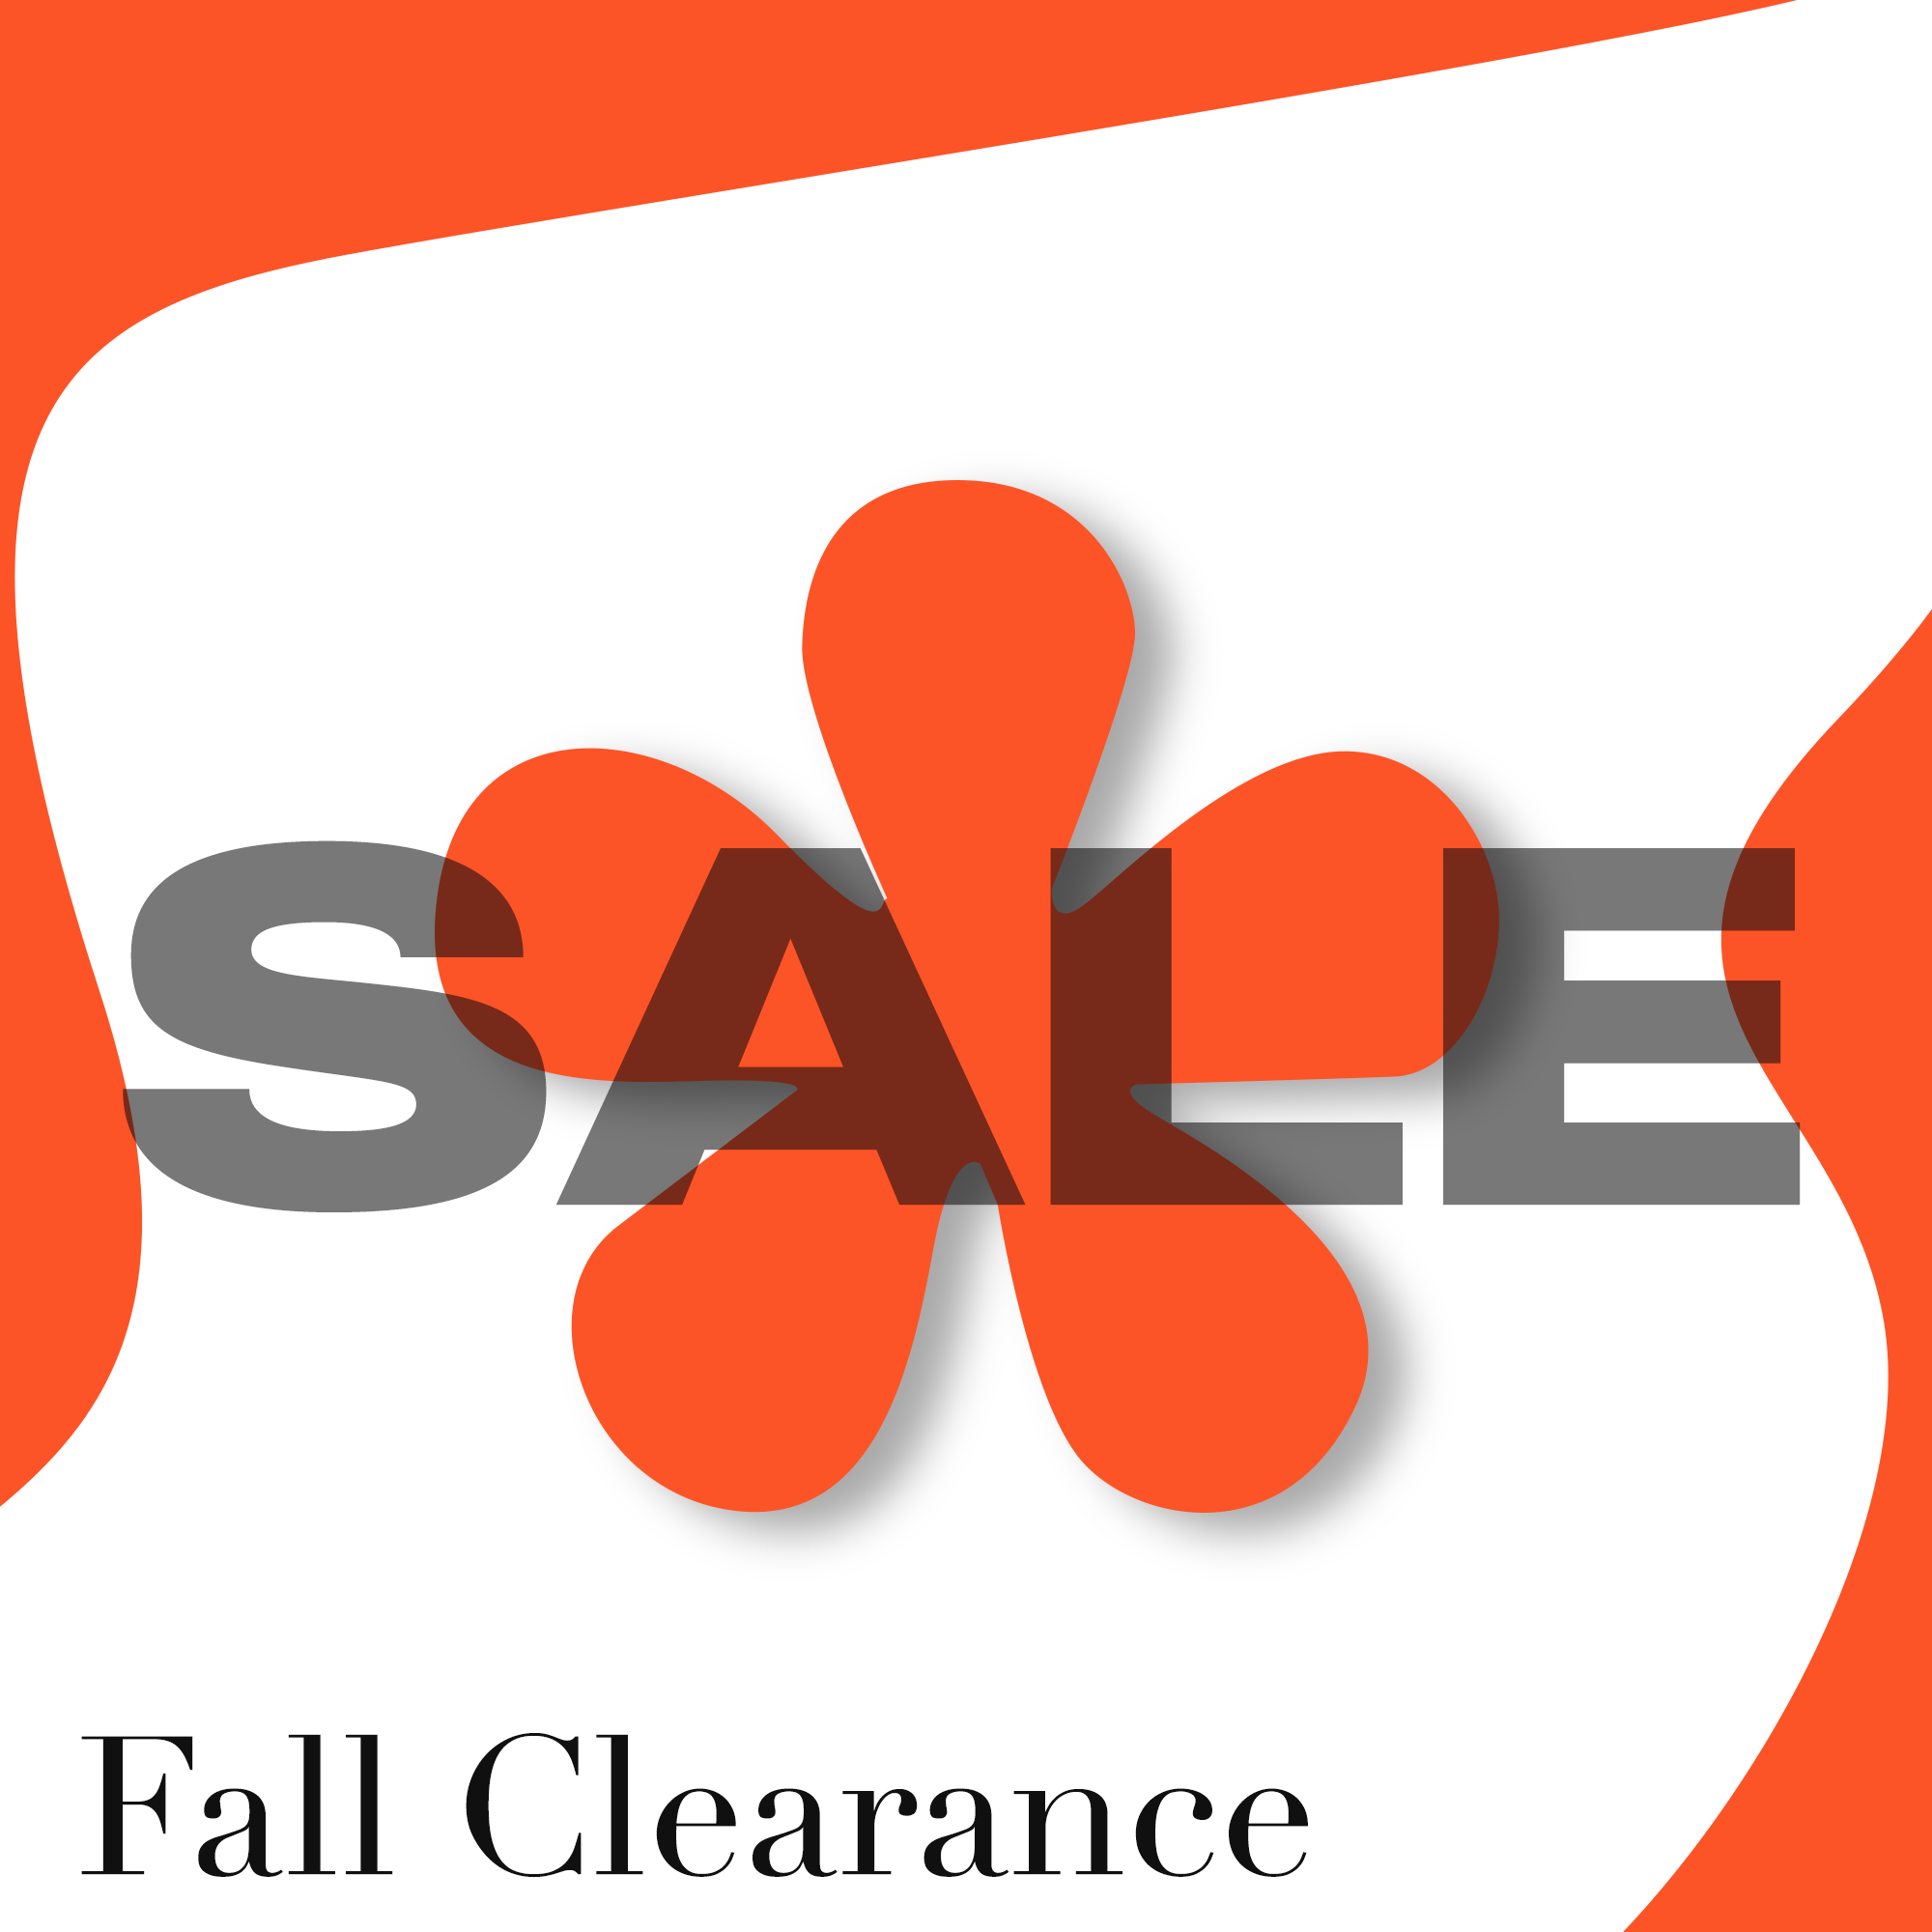 Fall Sale is here